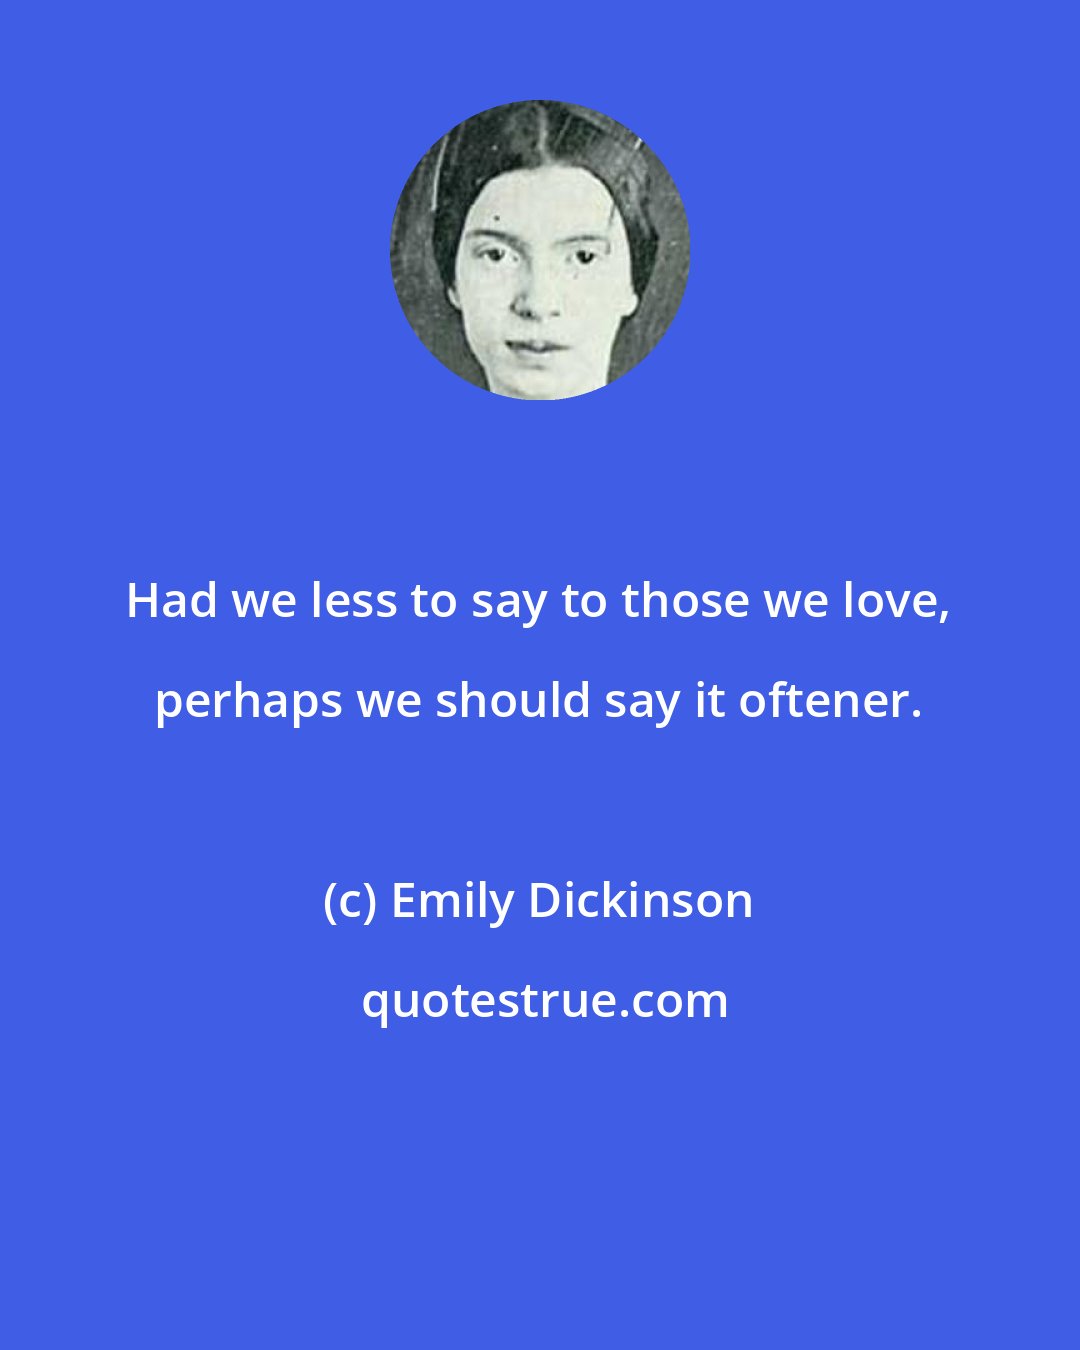 Emily Dickinson: Had we less to say to those we love, perhaps we should say it oftener.